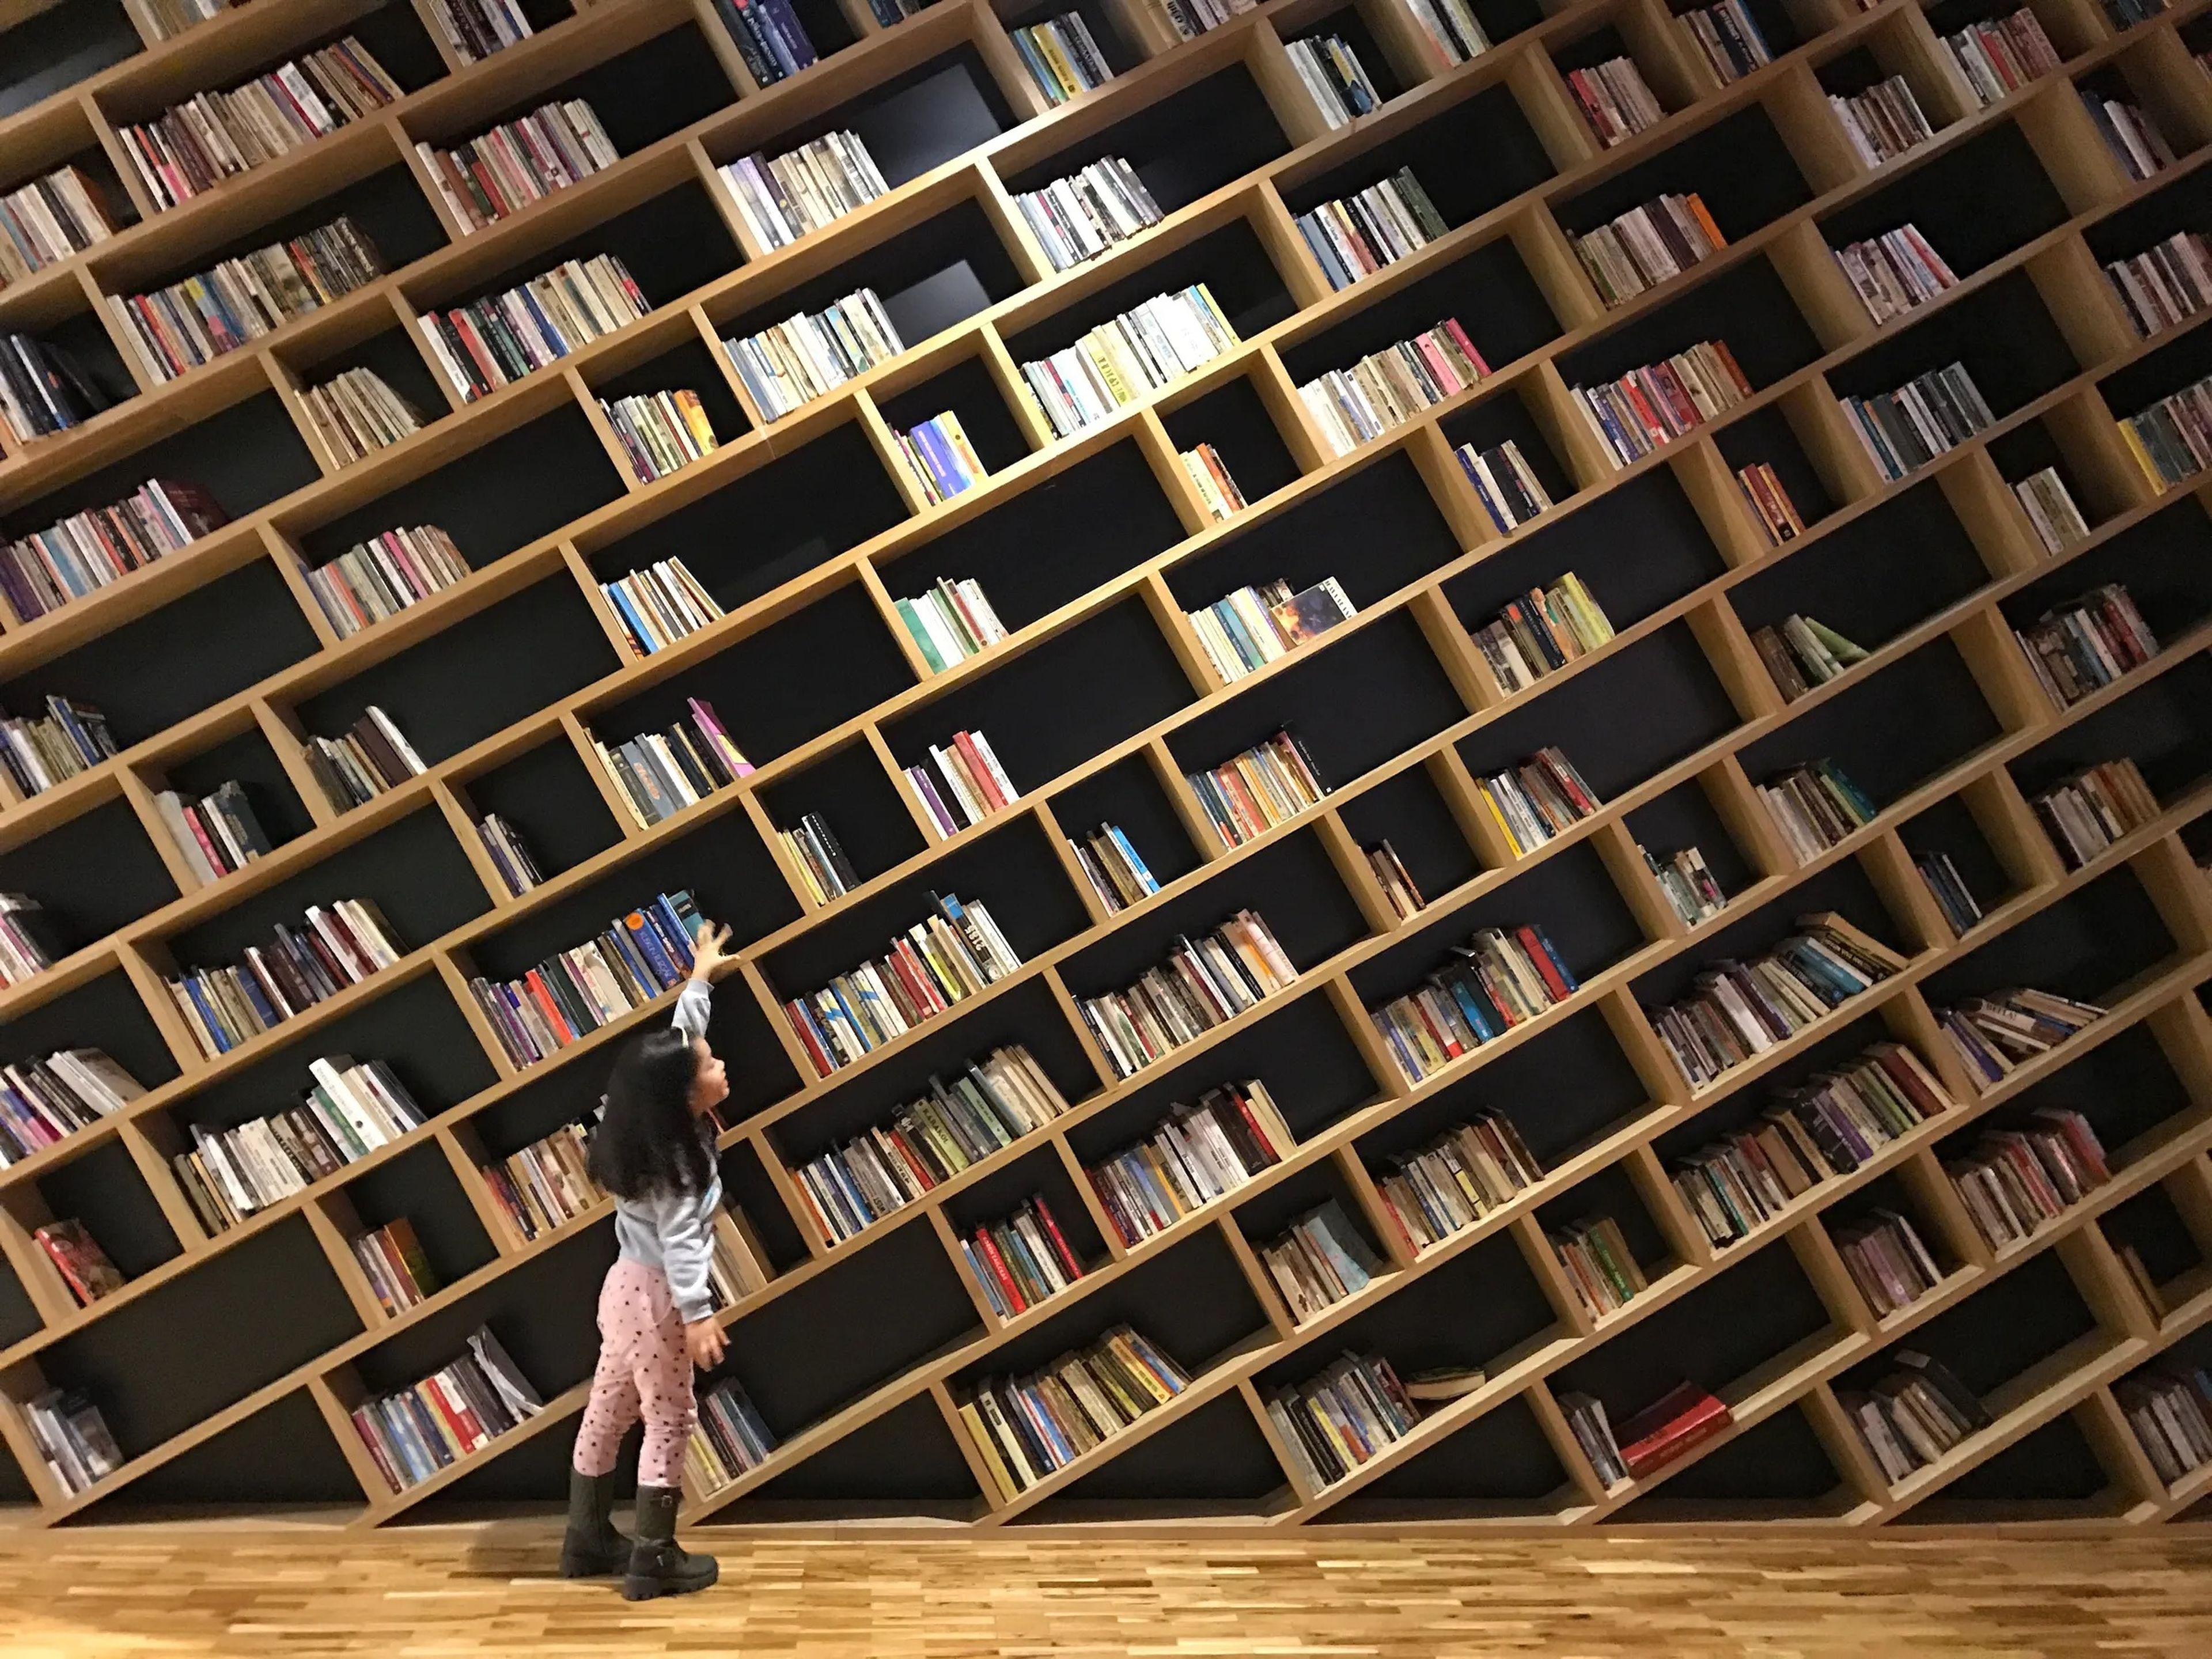 A child is shown reaching up to grab a book from a shelf.